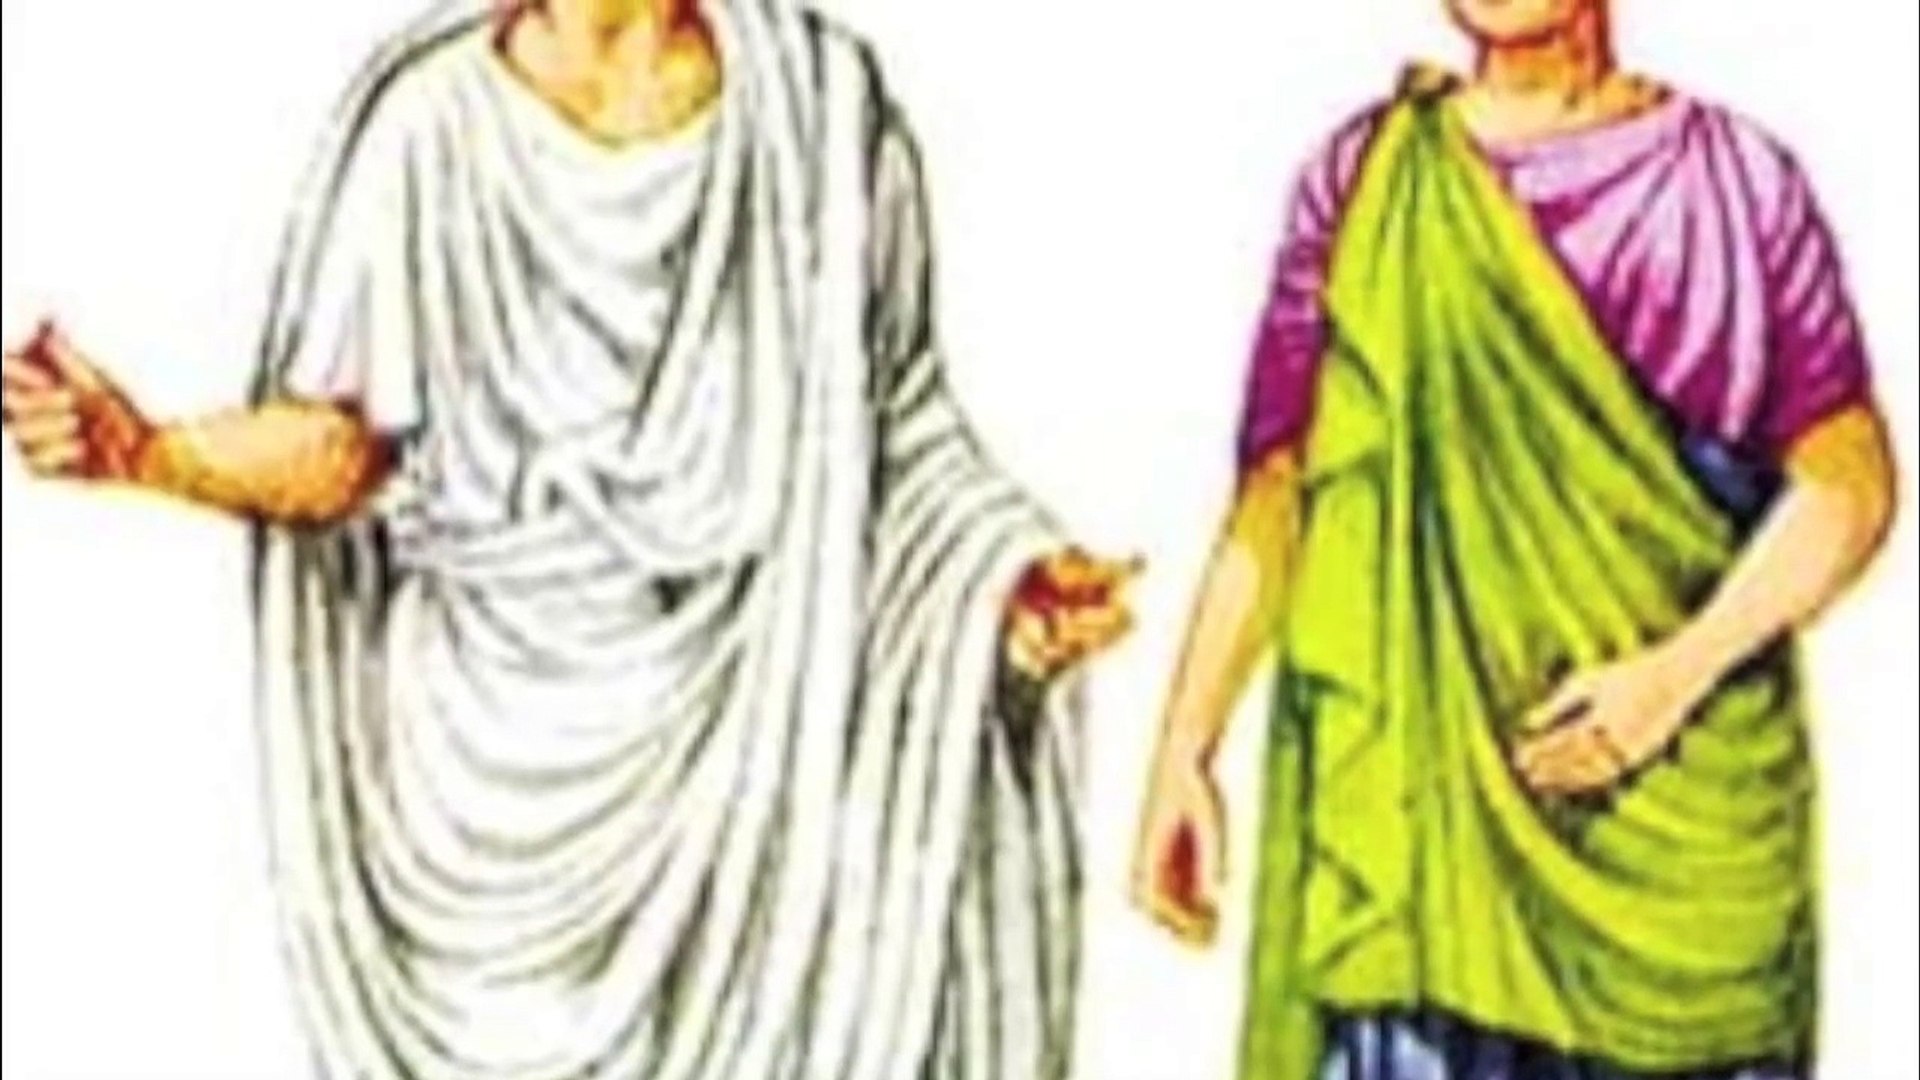 Ancient Roman Clothing and Fashion Photo Story